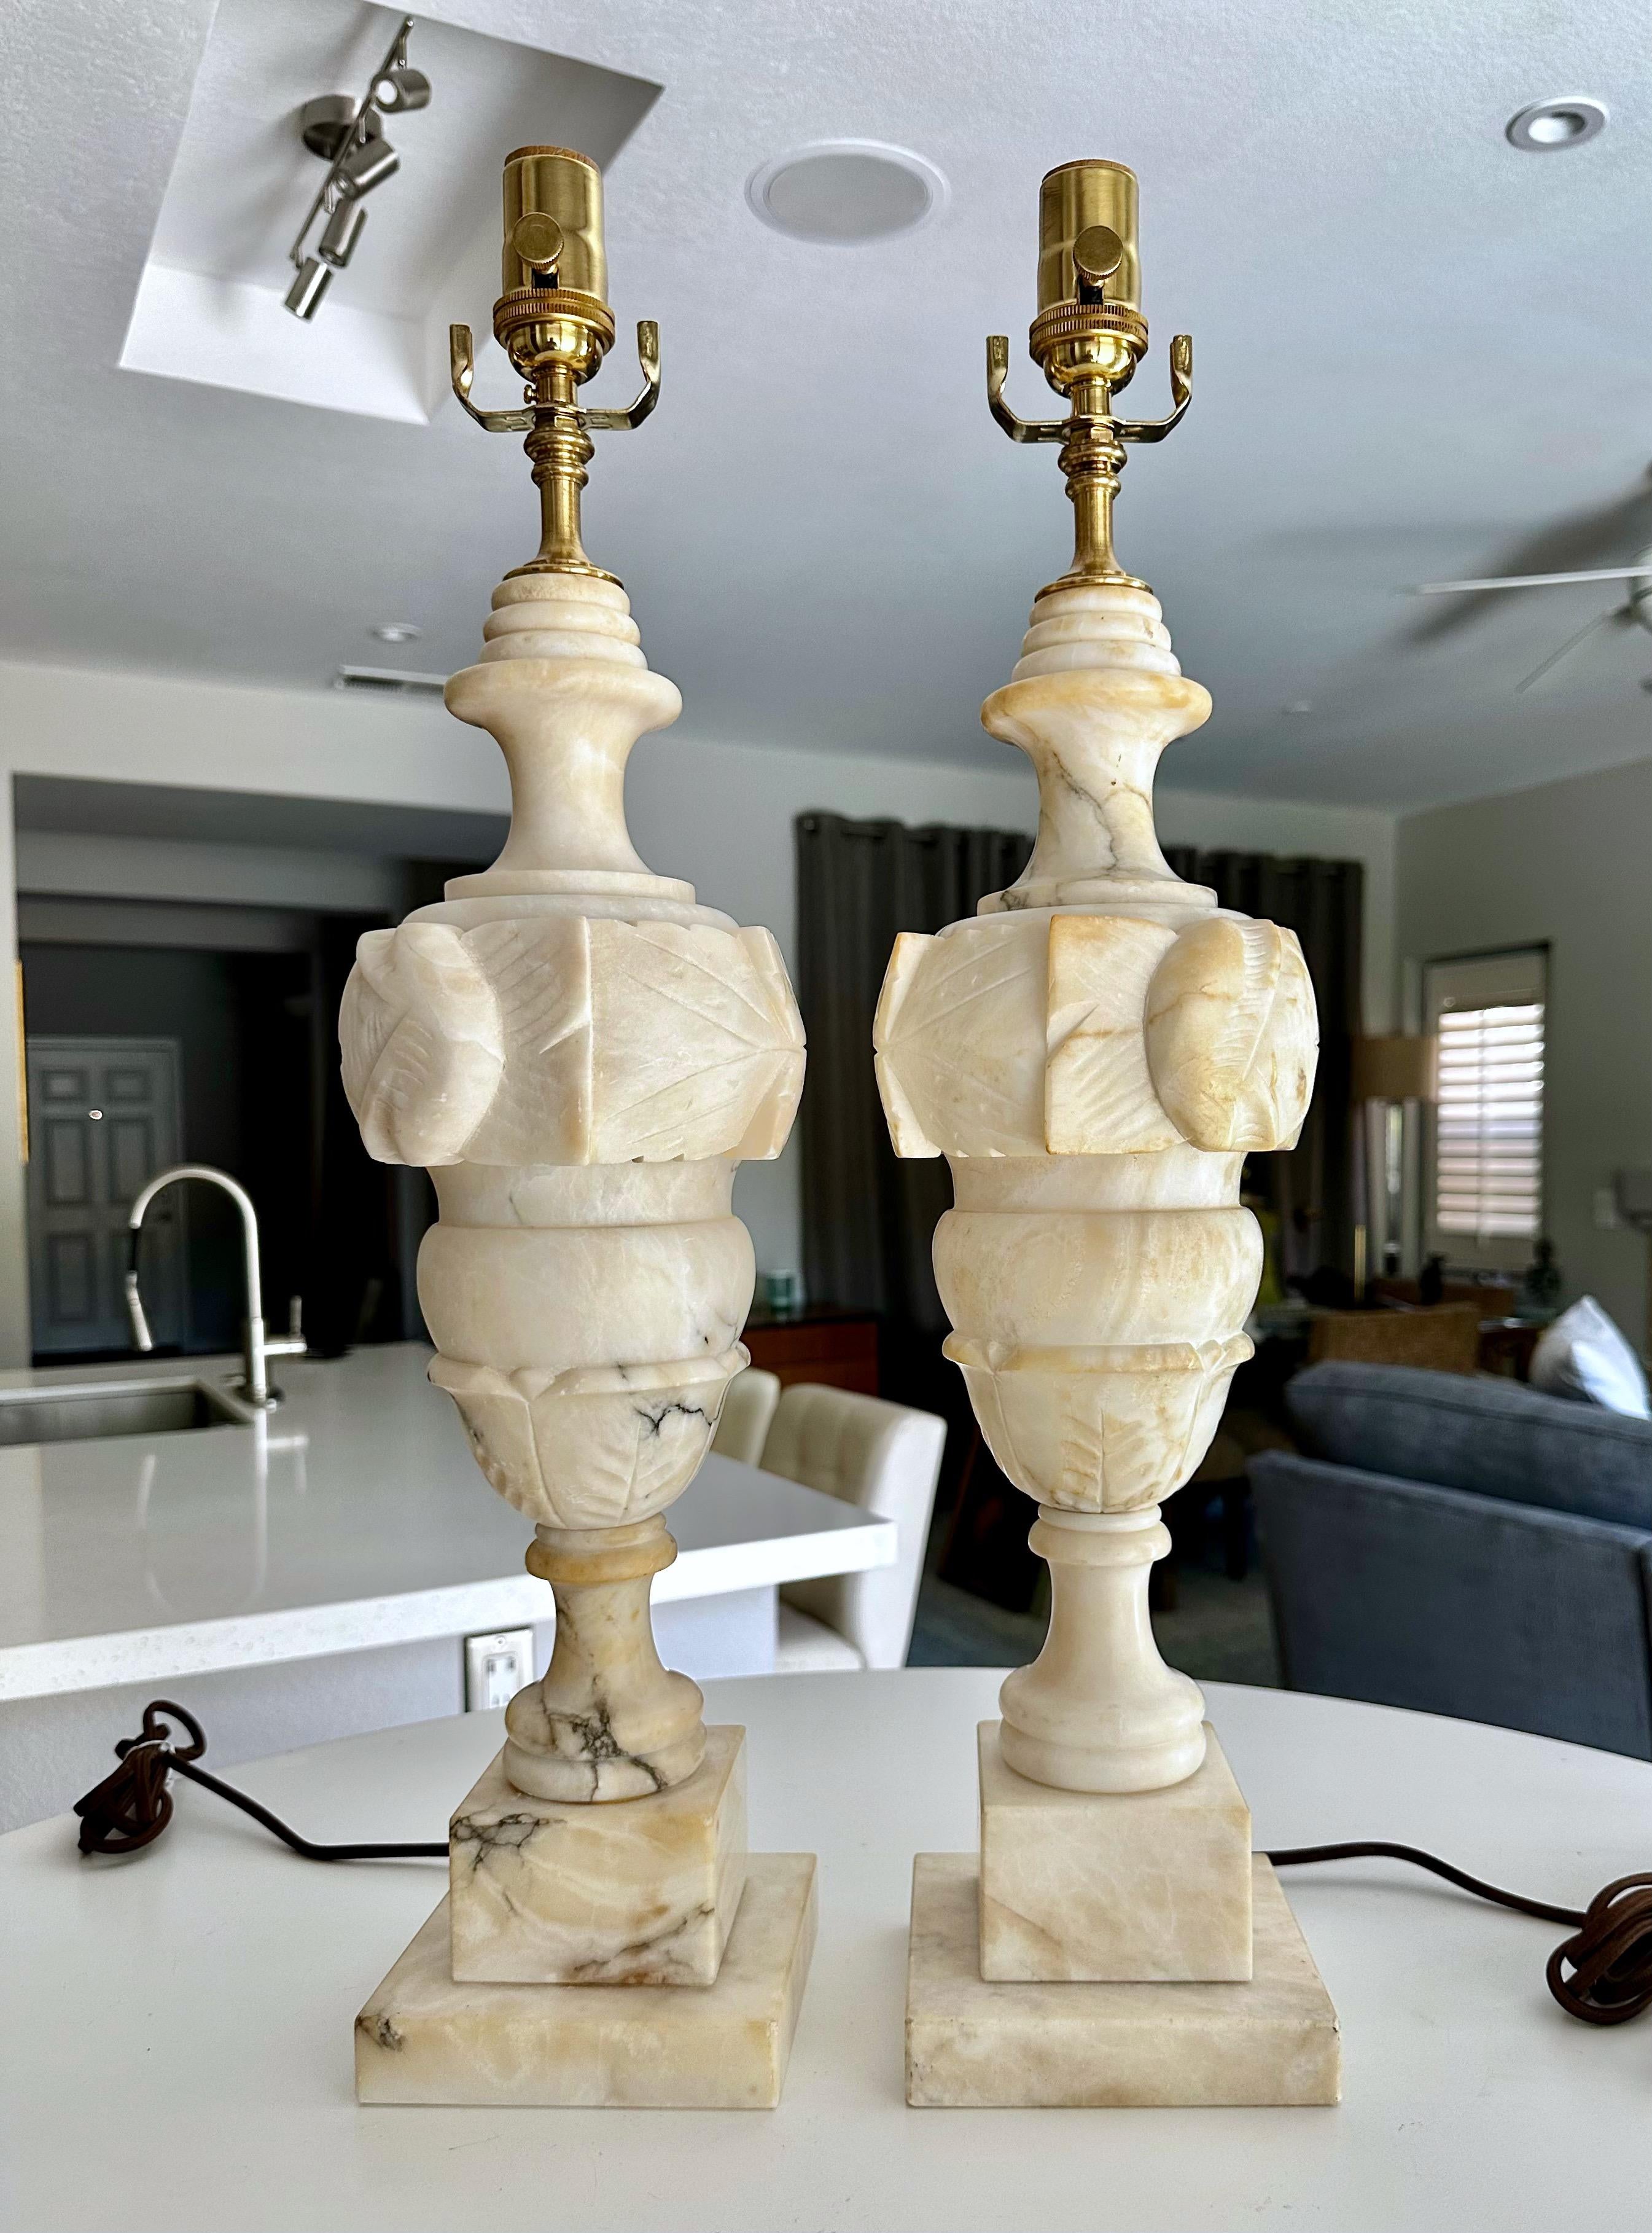 Pair of large finely crafted hand carved neo-classic style urn form alabaster lamps. The intricately carved white alabaster are covered with lots natural colorful veining. Newly wired with 3 way sockets and rayon covered cords.
Shades not included.